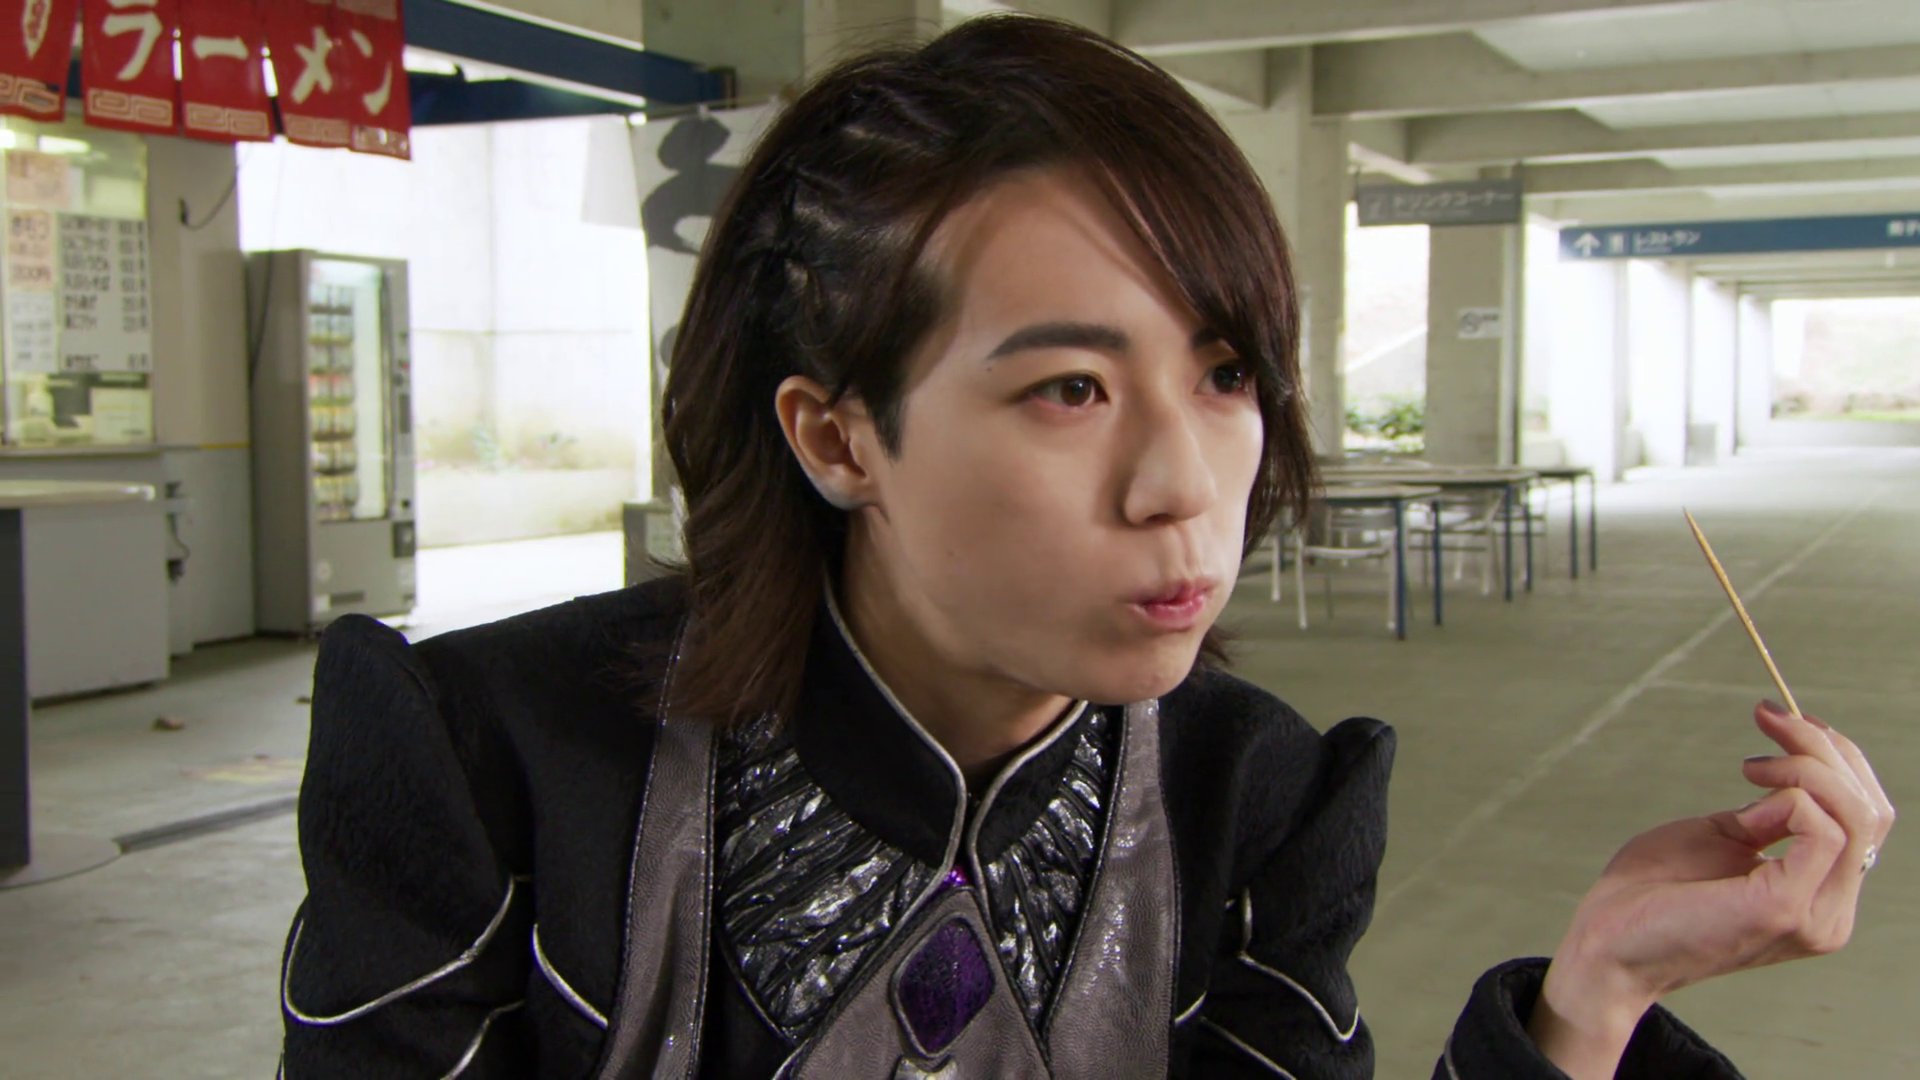 Close shot of Stacey eat takoyaki, can now see he has shoulder-length hair, with twists on one side.